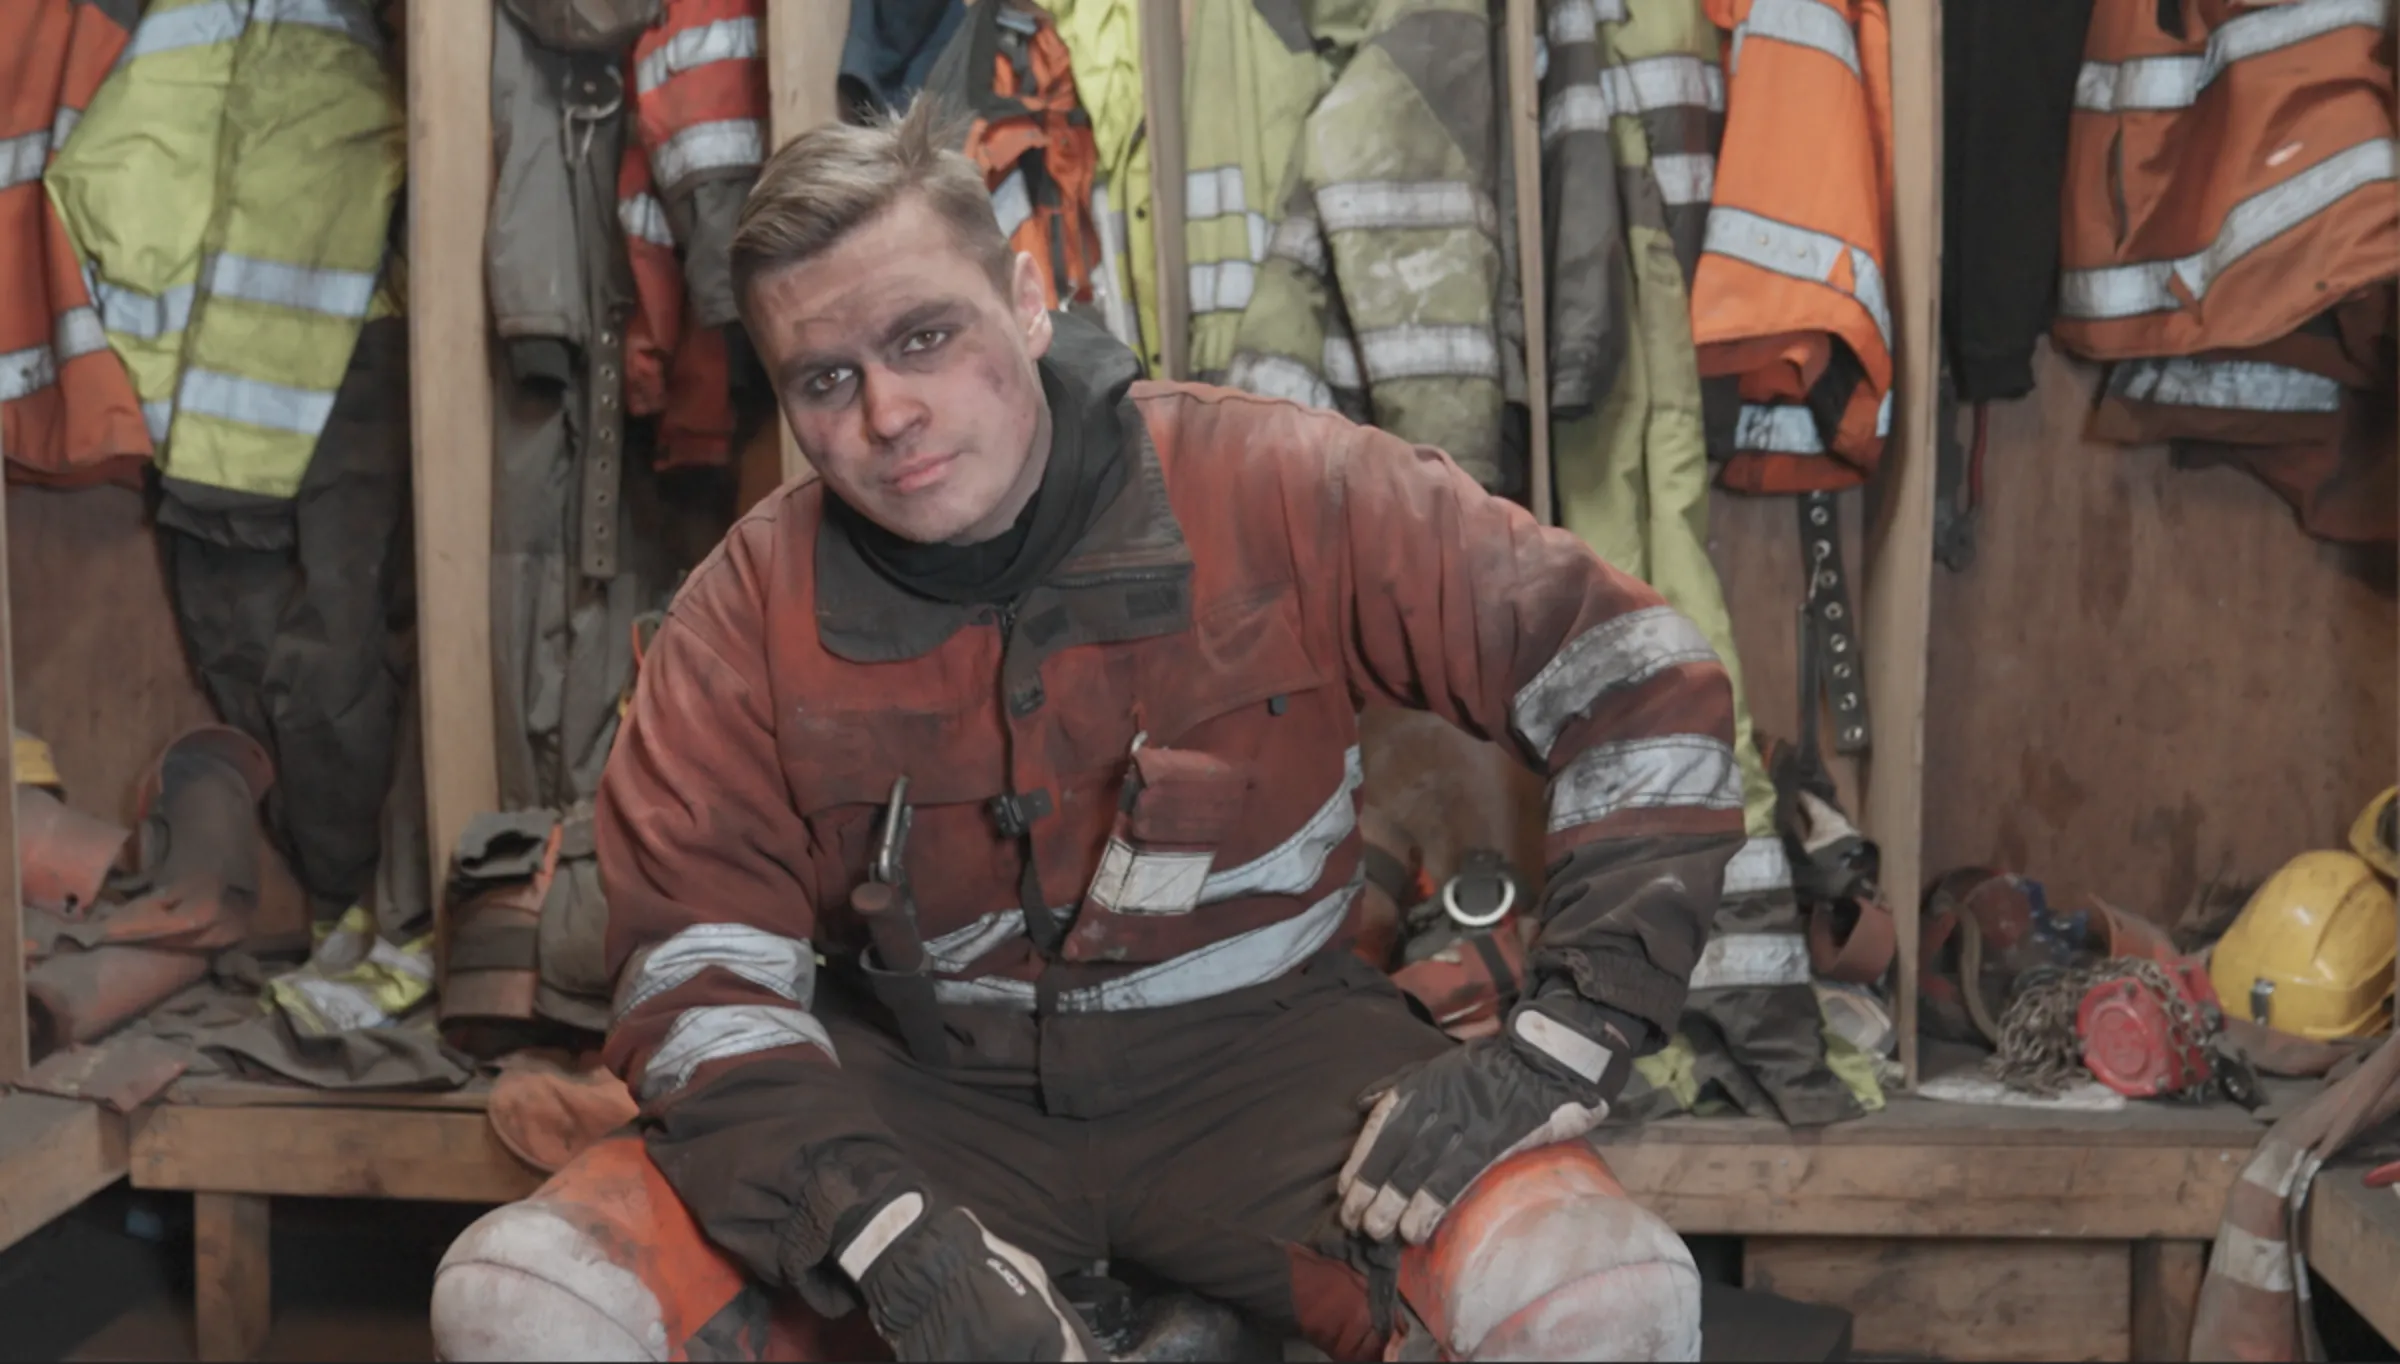 Sander Sarheim, a coal miner from Svalbard, a Norwegian archipelago, poses in this still from a video